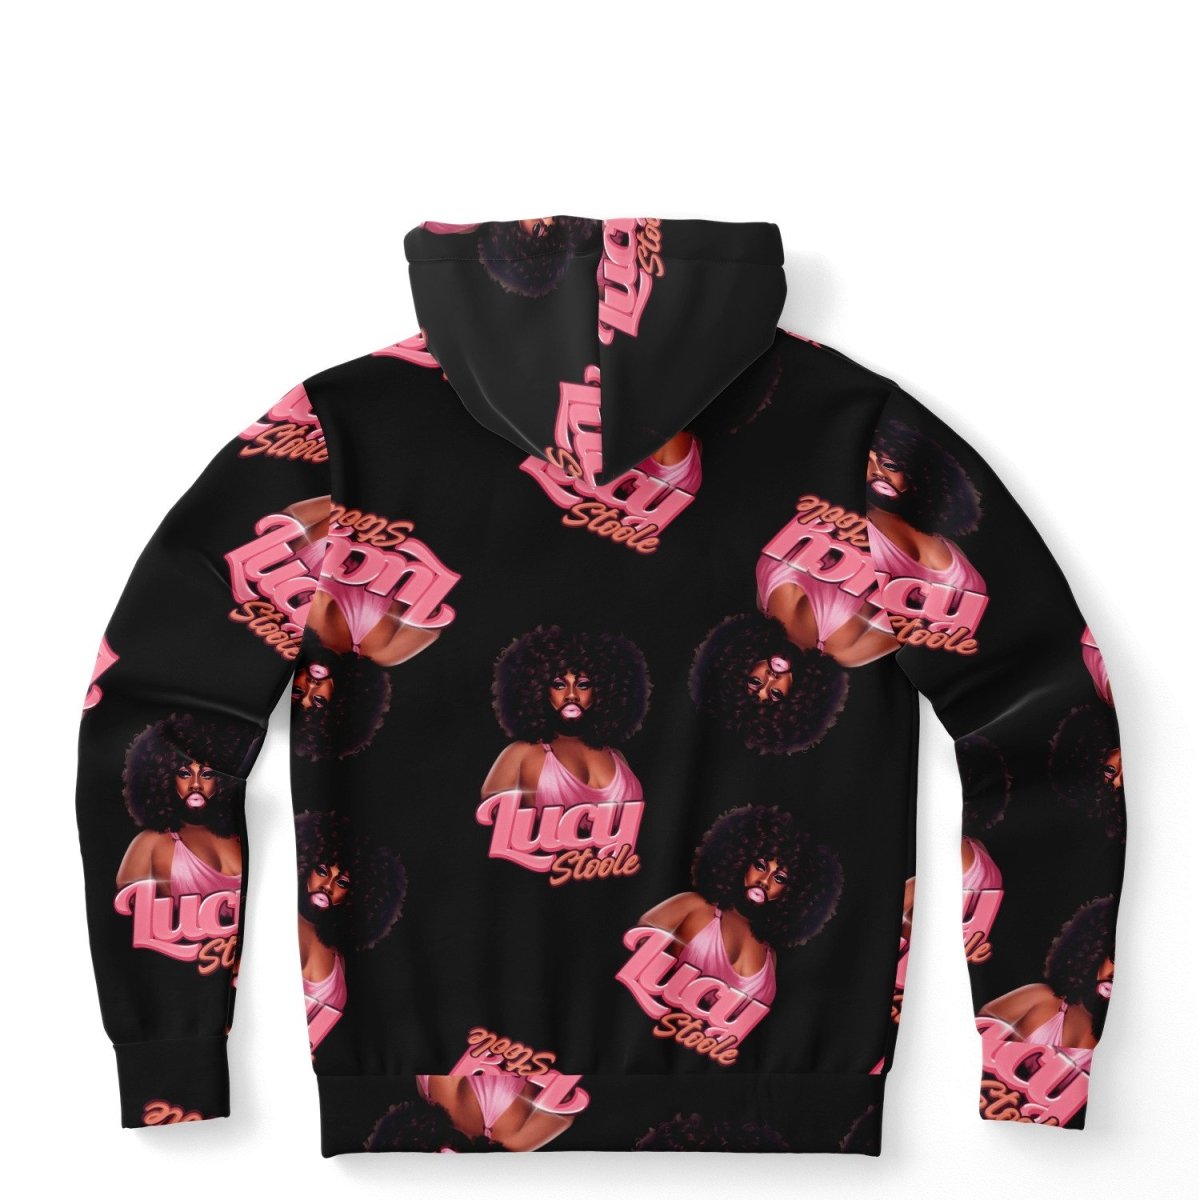 Lucy Stoole All Over Print Hoodie - dragqueenmerch